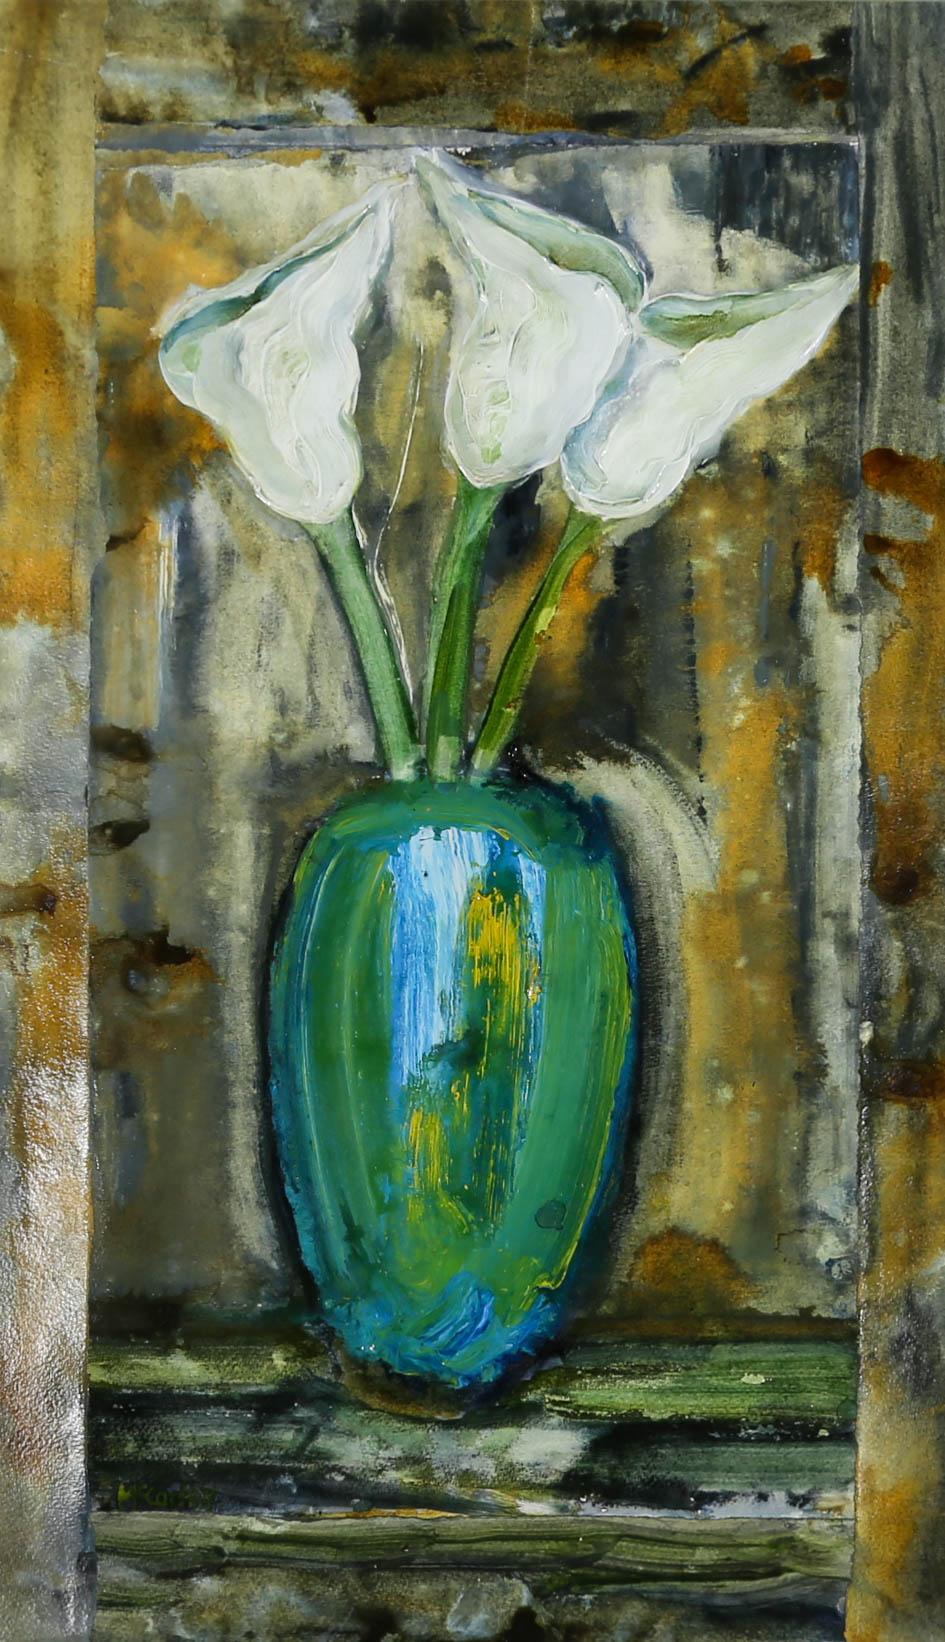 A wonderful still life composition by contemporary artist Peter McCarthy, depicting a bunch of Arum Lilies arranged in a blue and green lustre vase. An inner frame has been created from strips of teared paper, coated in gestural watercolour washes.